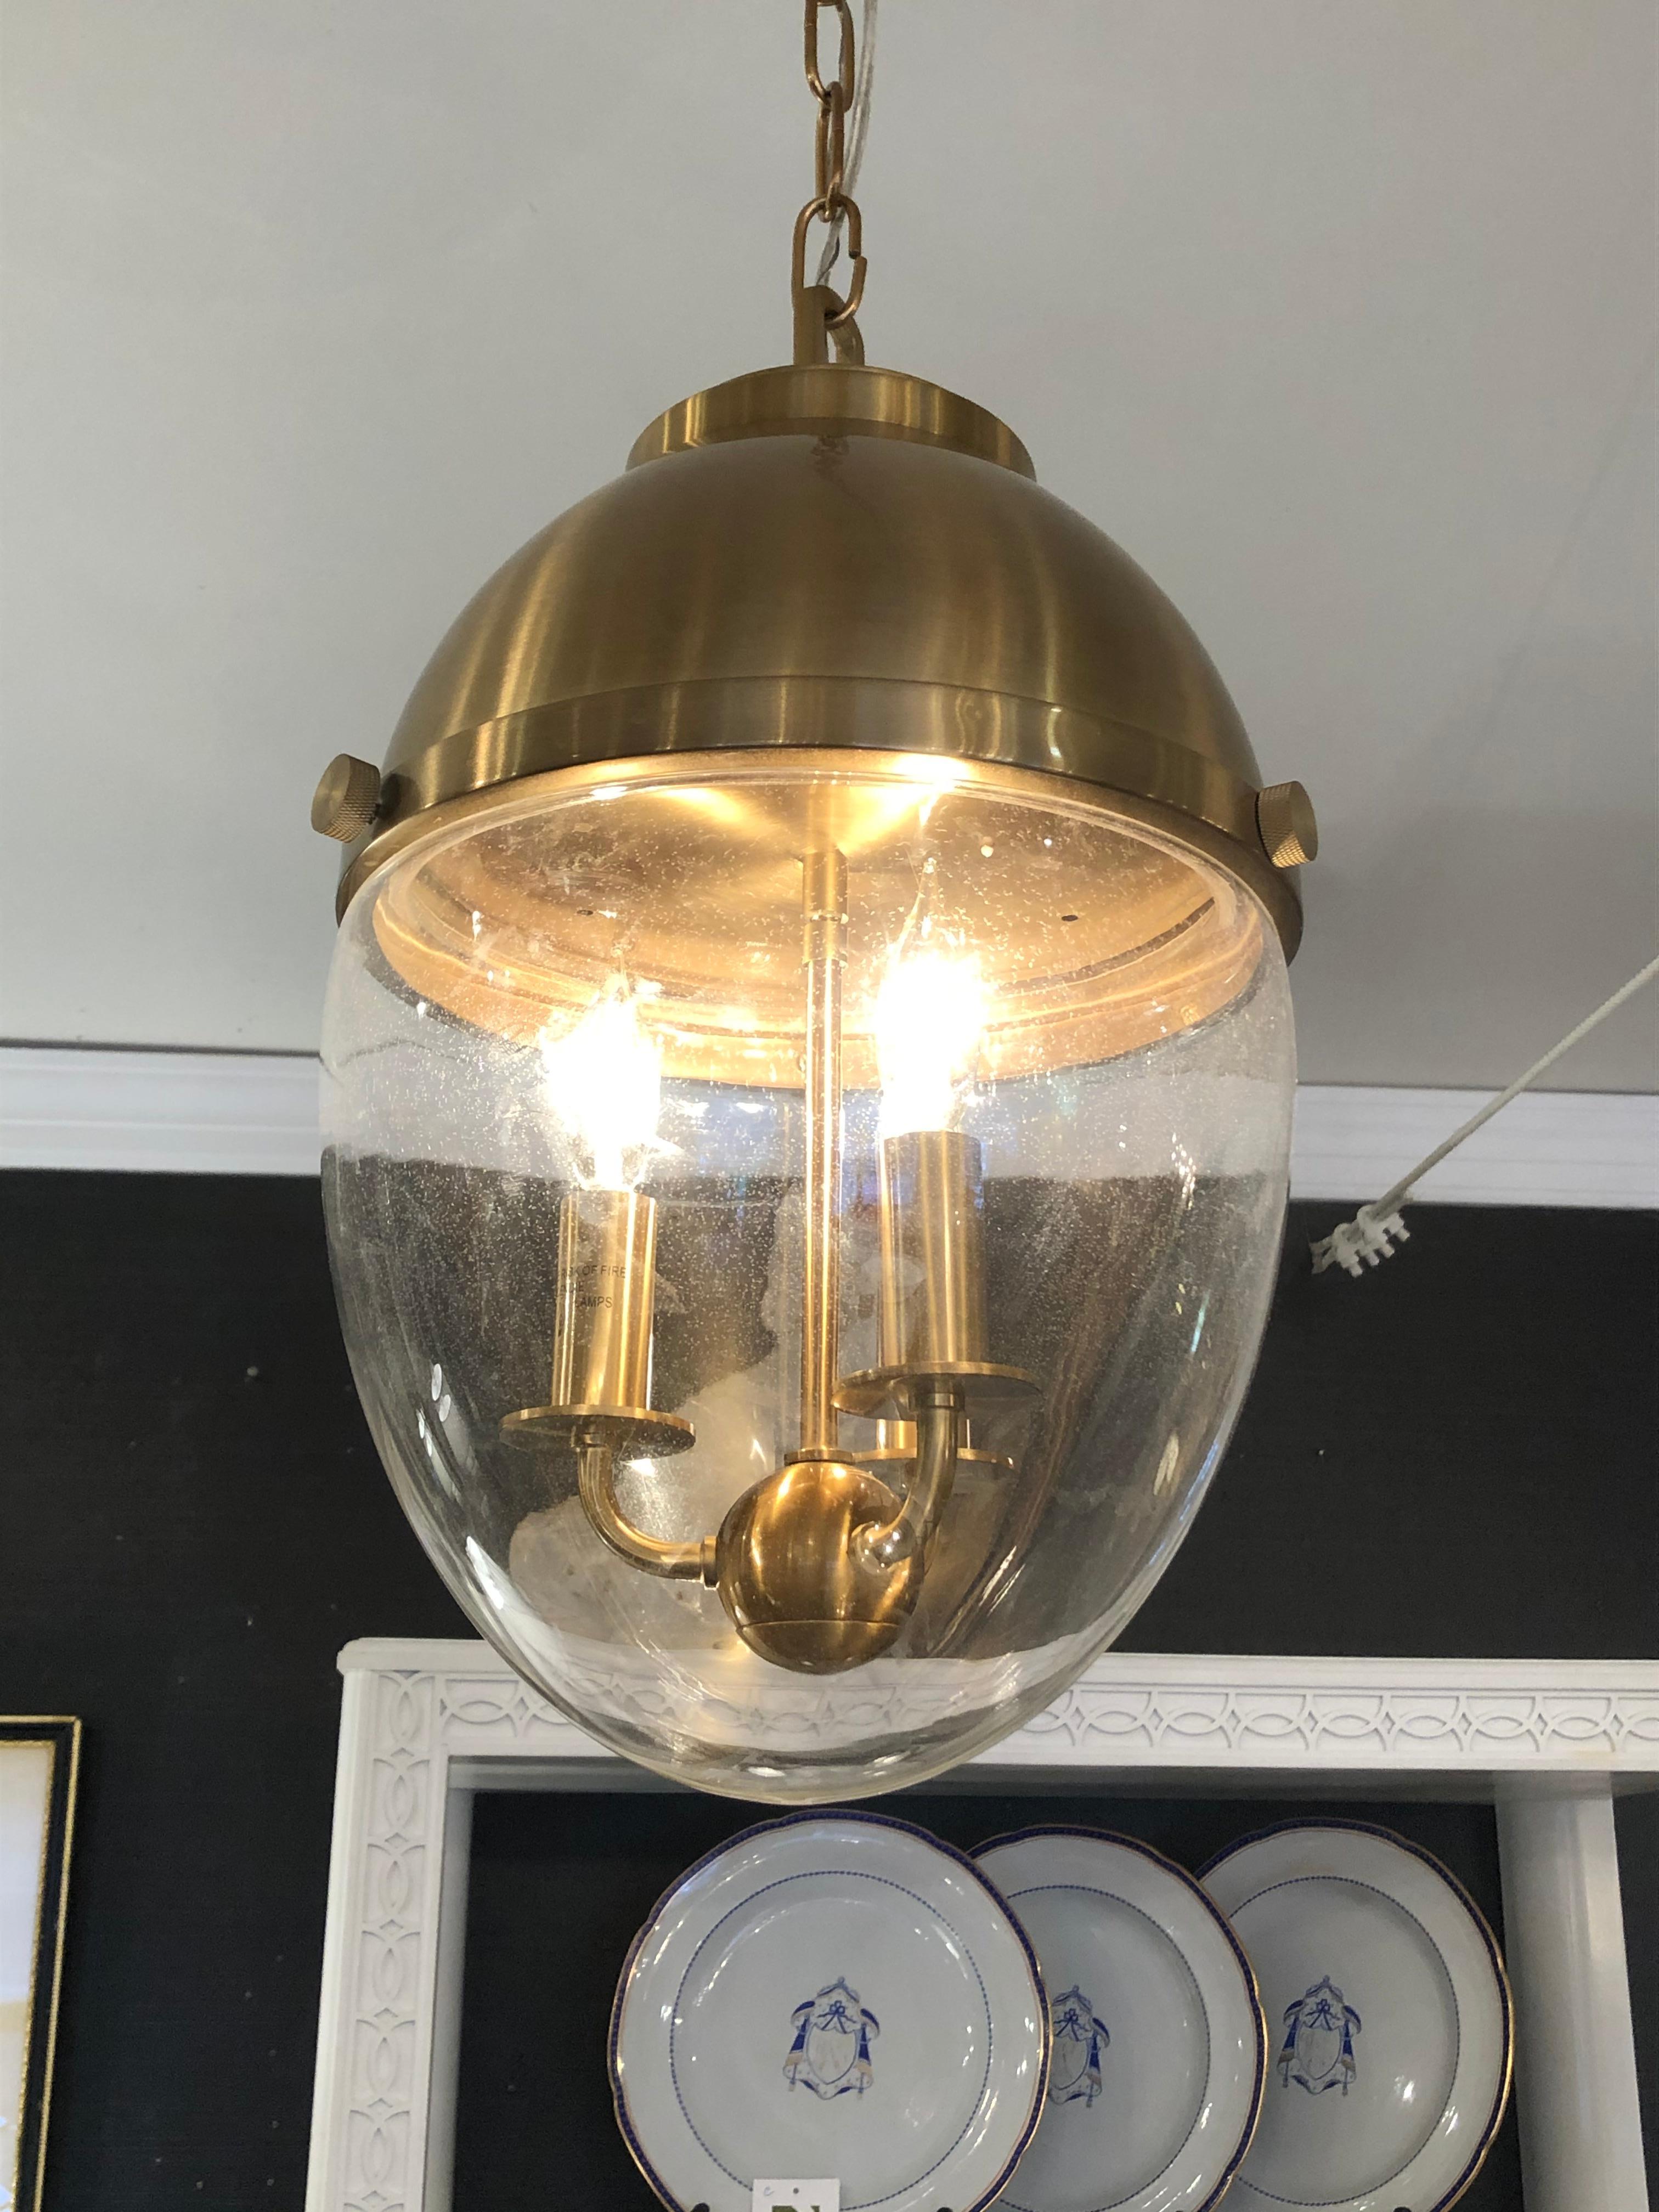 Cool contemporary designed pendant chandelier having fabulous egg shape with top half brass and lower part of lantern clear glass with 3 brass candle lights inside.
3 ft of chain included.